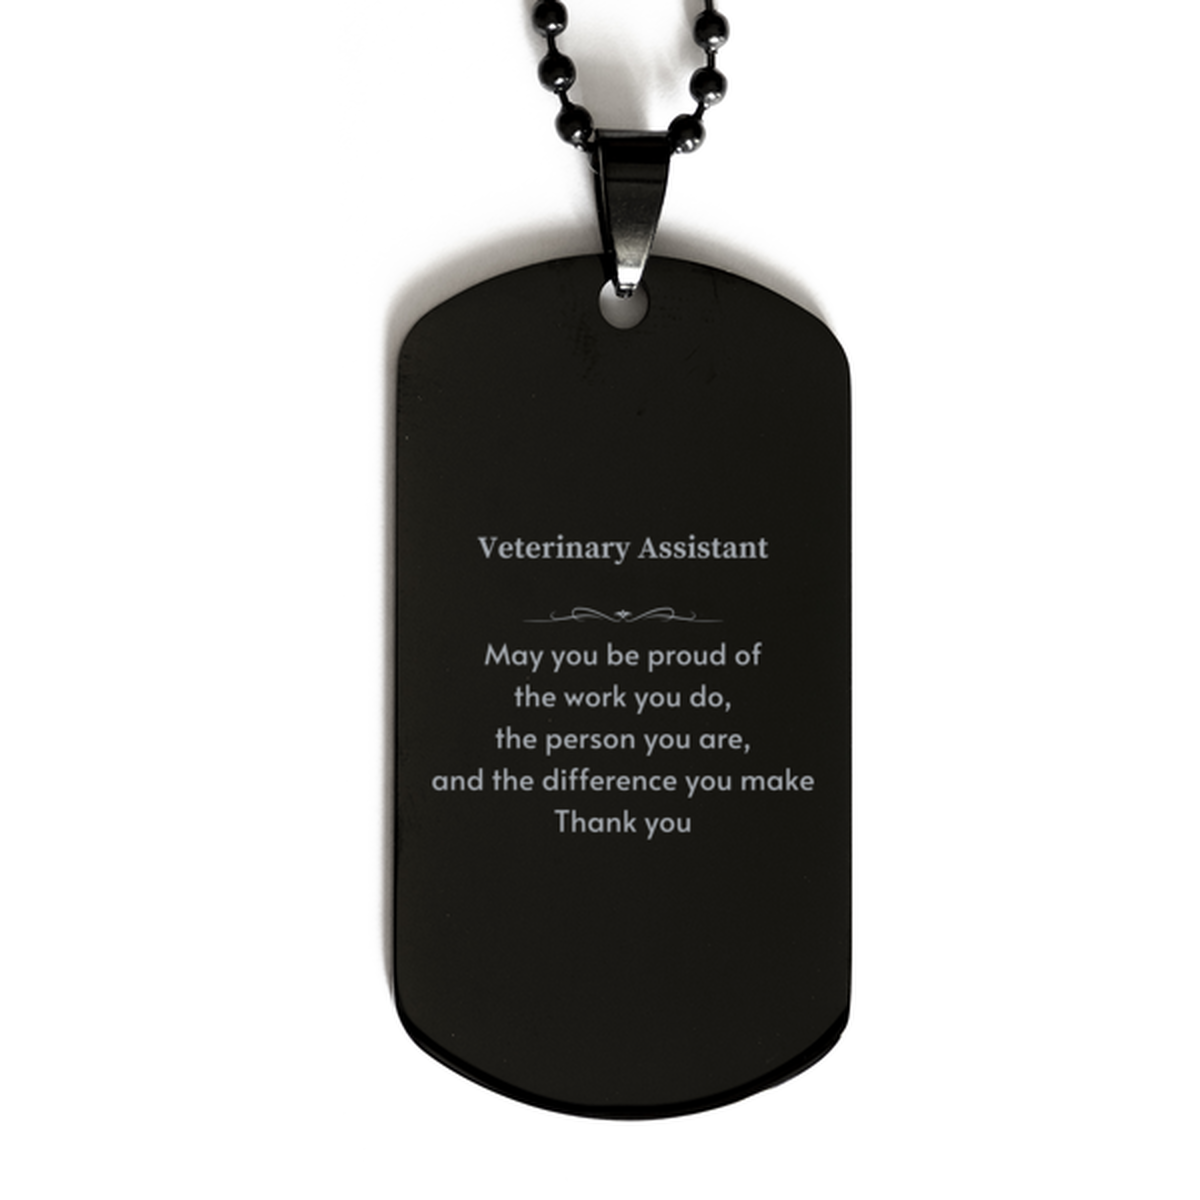 Heartwarming Black Dog Tag Retirement Coworkers Gifts for Veterinary Assistant, Veterinary Assistant May You be proud of the work you do, the person you are Gifts for Boss Men Women Friends